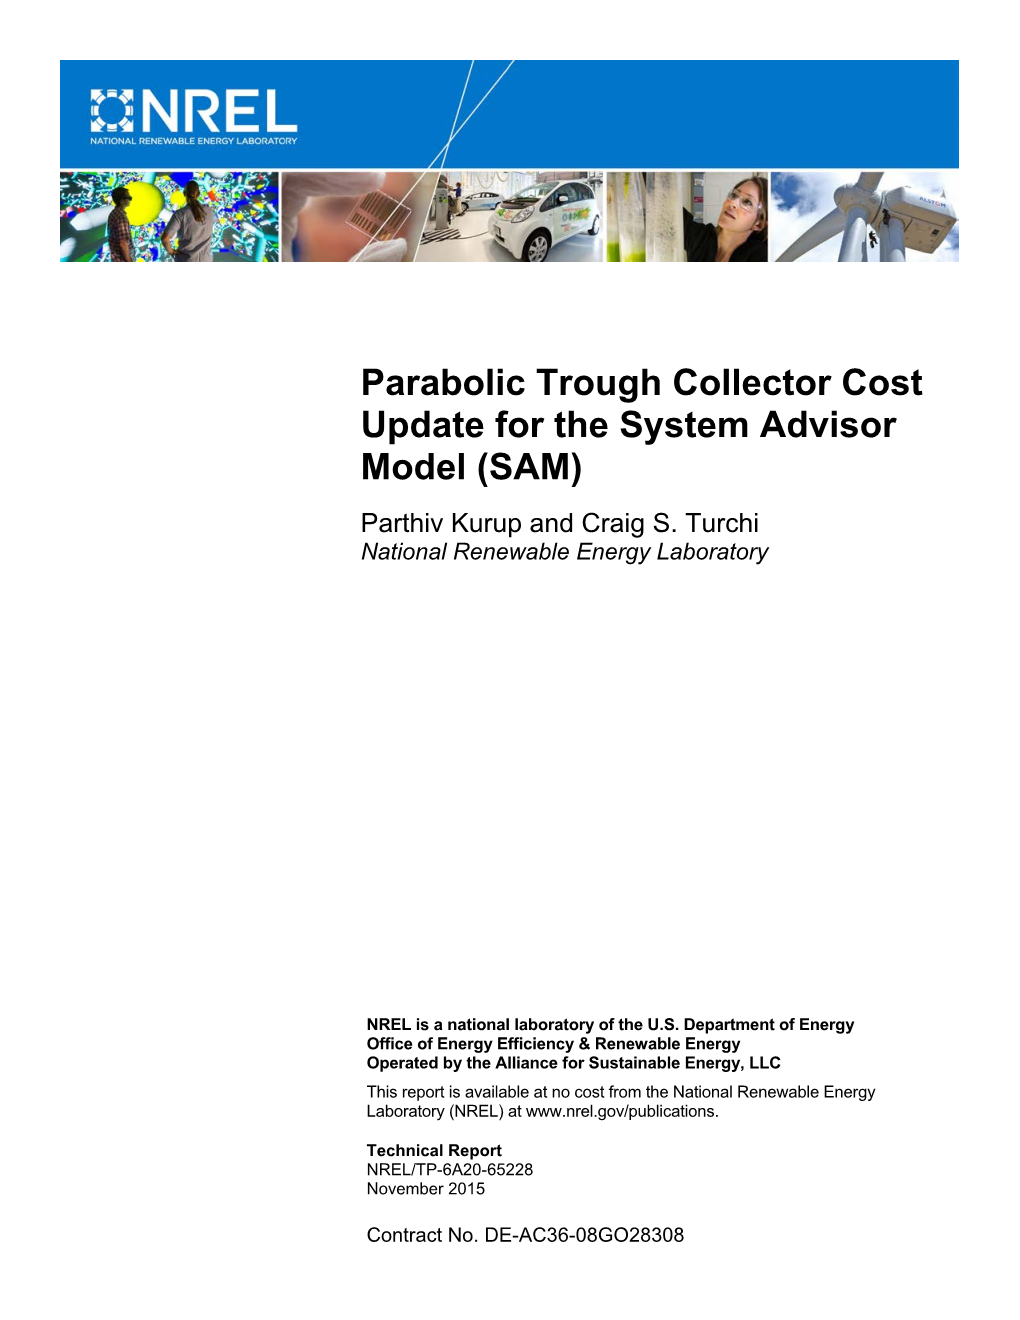 Parabolic Trough Collector Cost Update for the System Advisor Model (SAM) Parthiv Kurup and Craig S